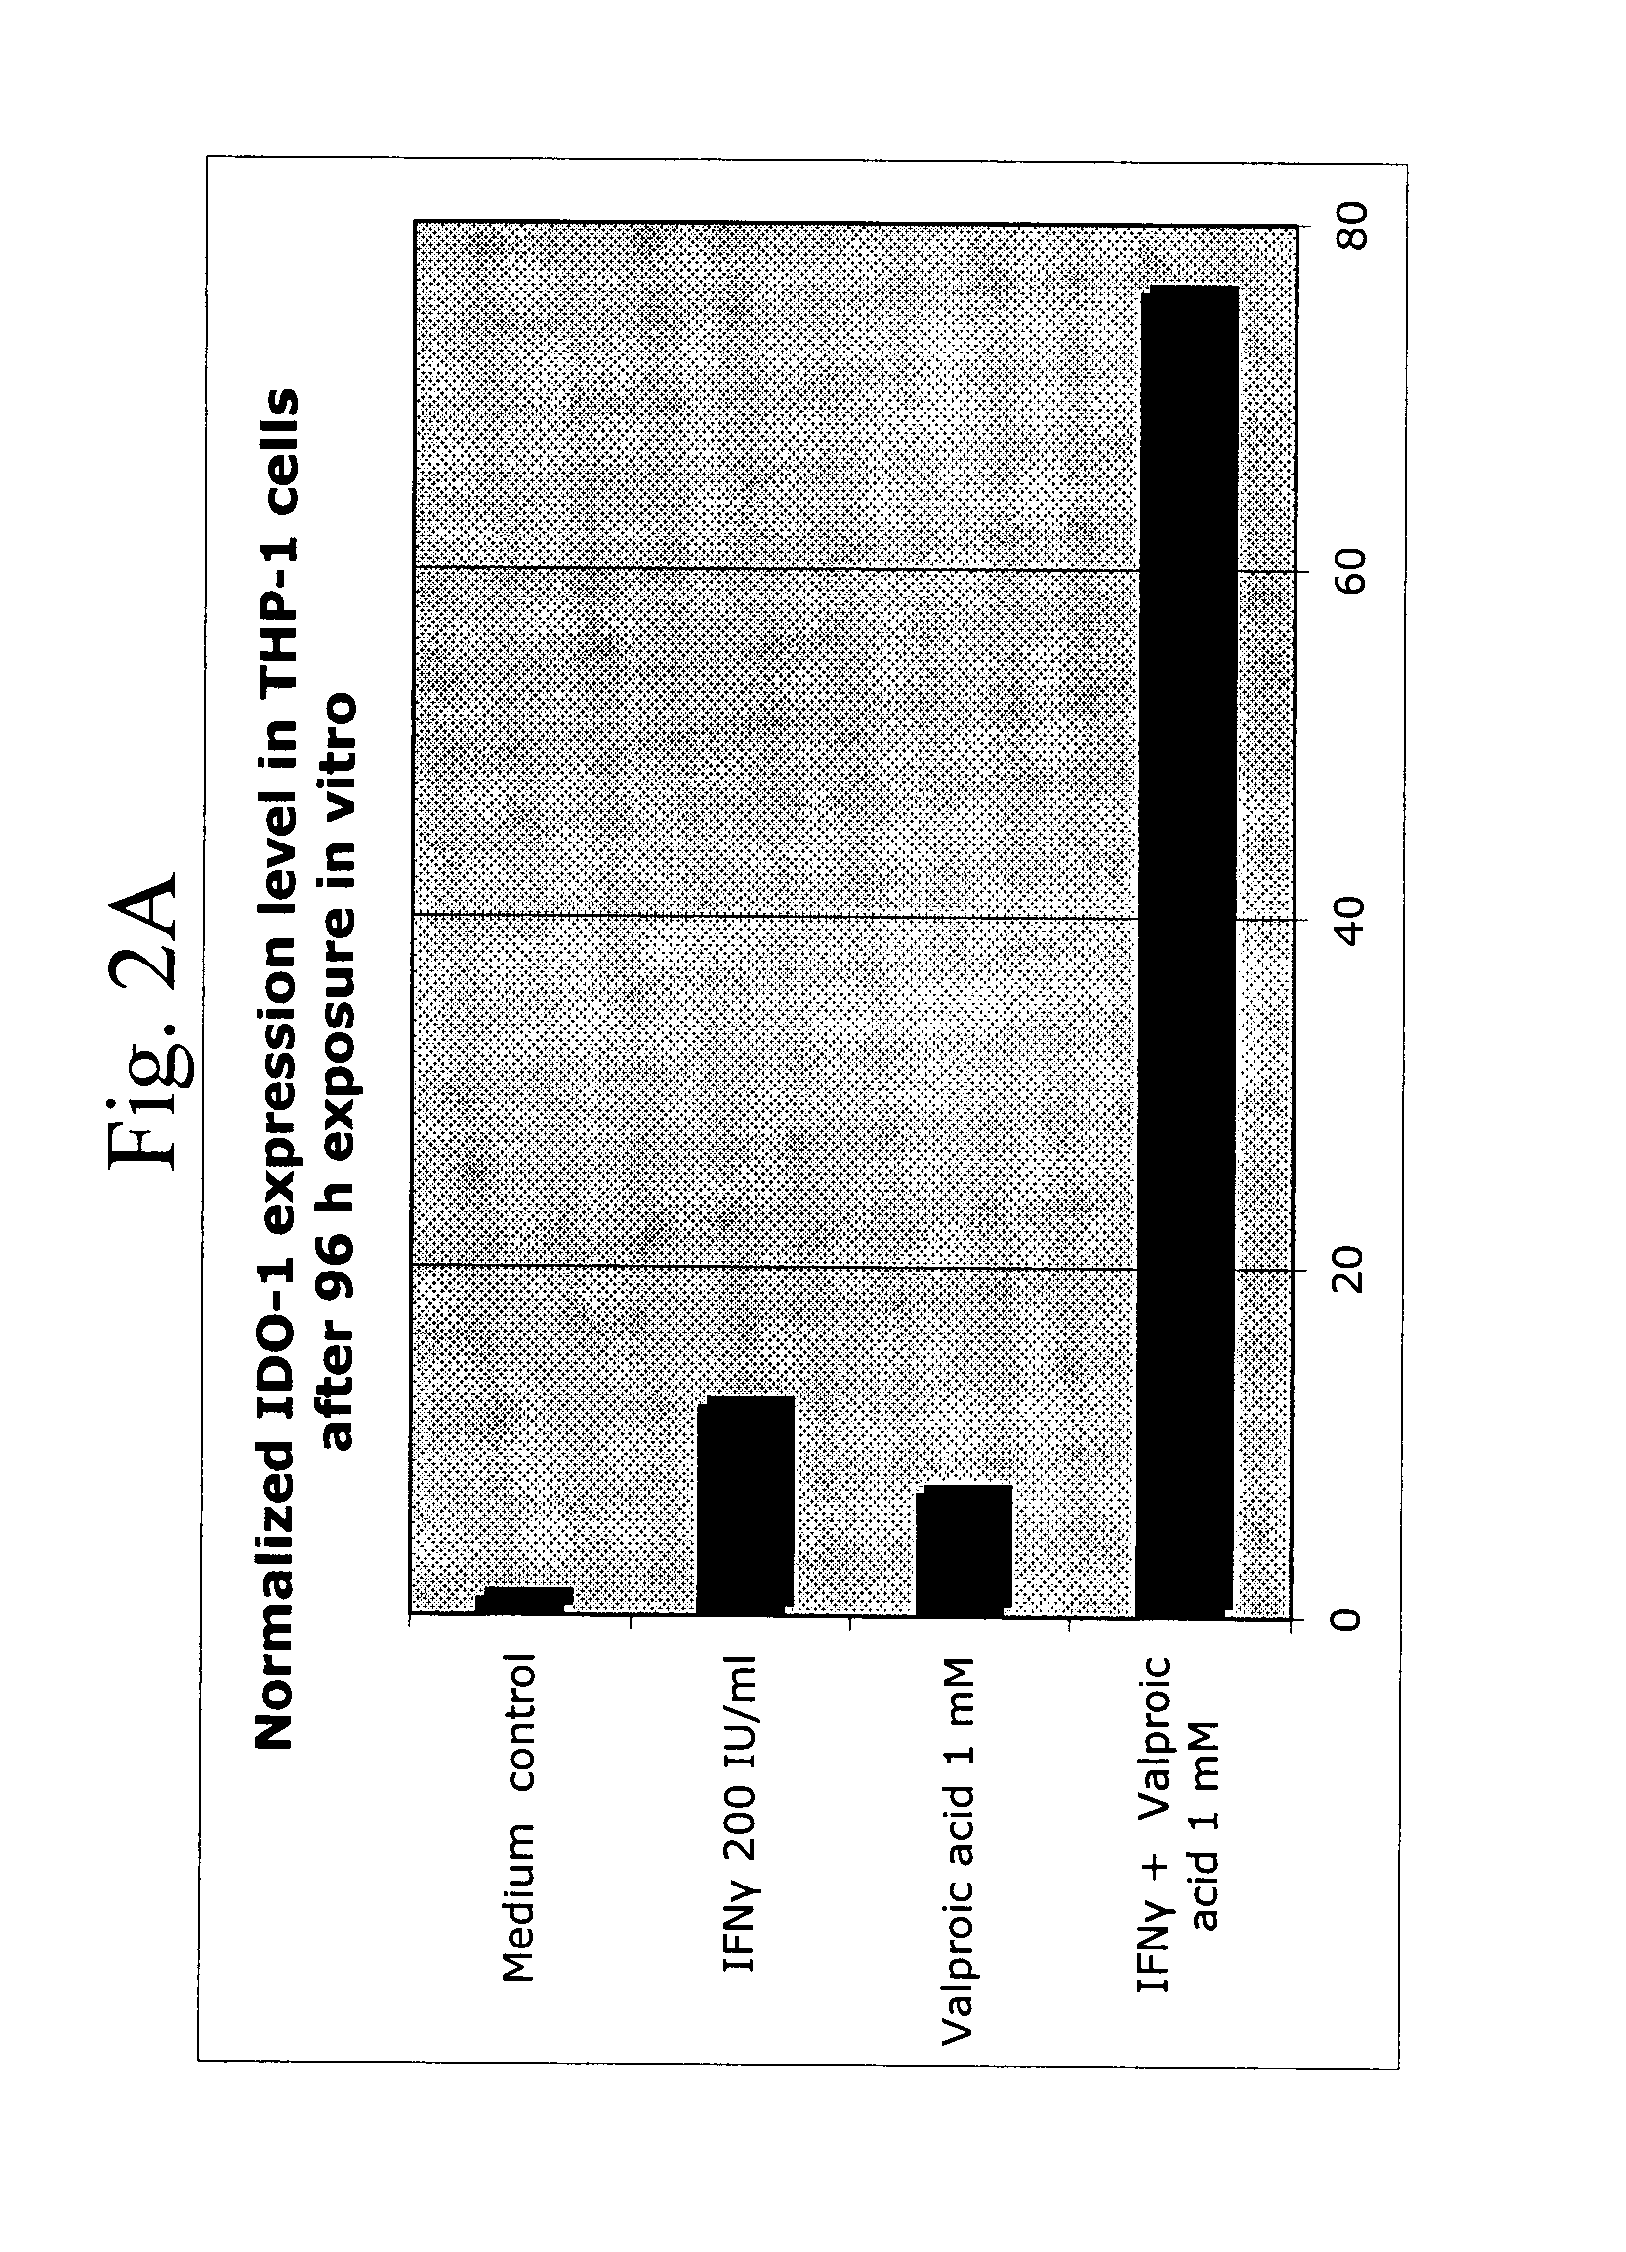 Composition Comprising At Least Two Compounds Which Induce Indolamine 2,3 - Dioxygenase (IDO), for the Treatment of an Autoimmune Disorder or Suffering from Immune Rejection of Organs